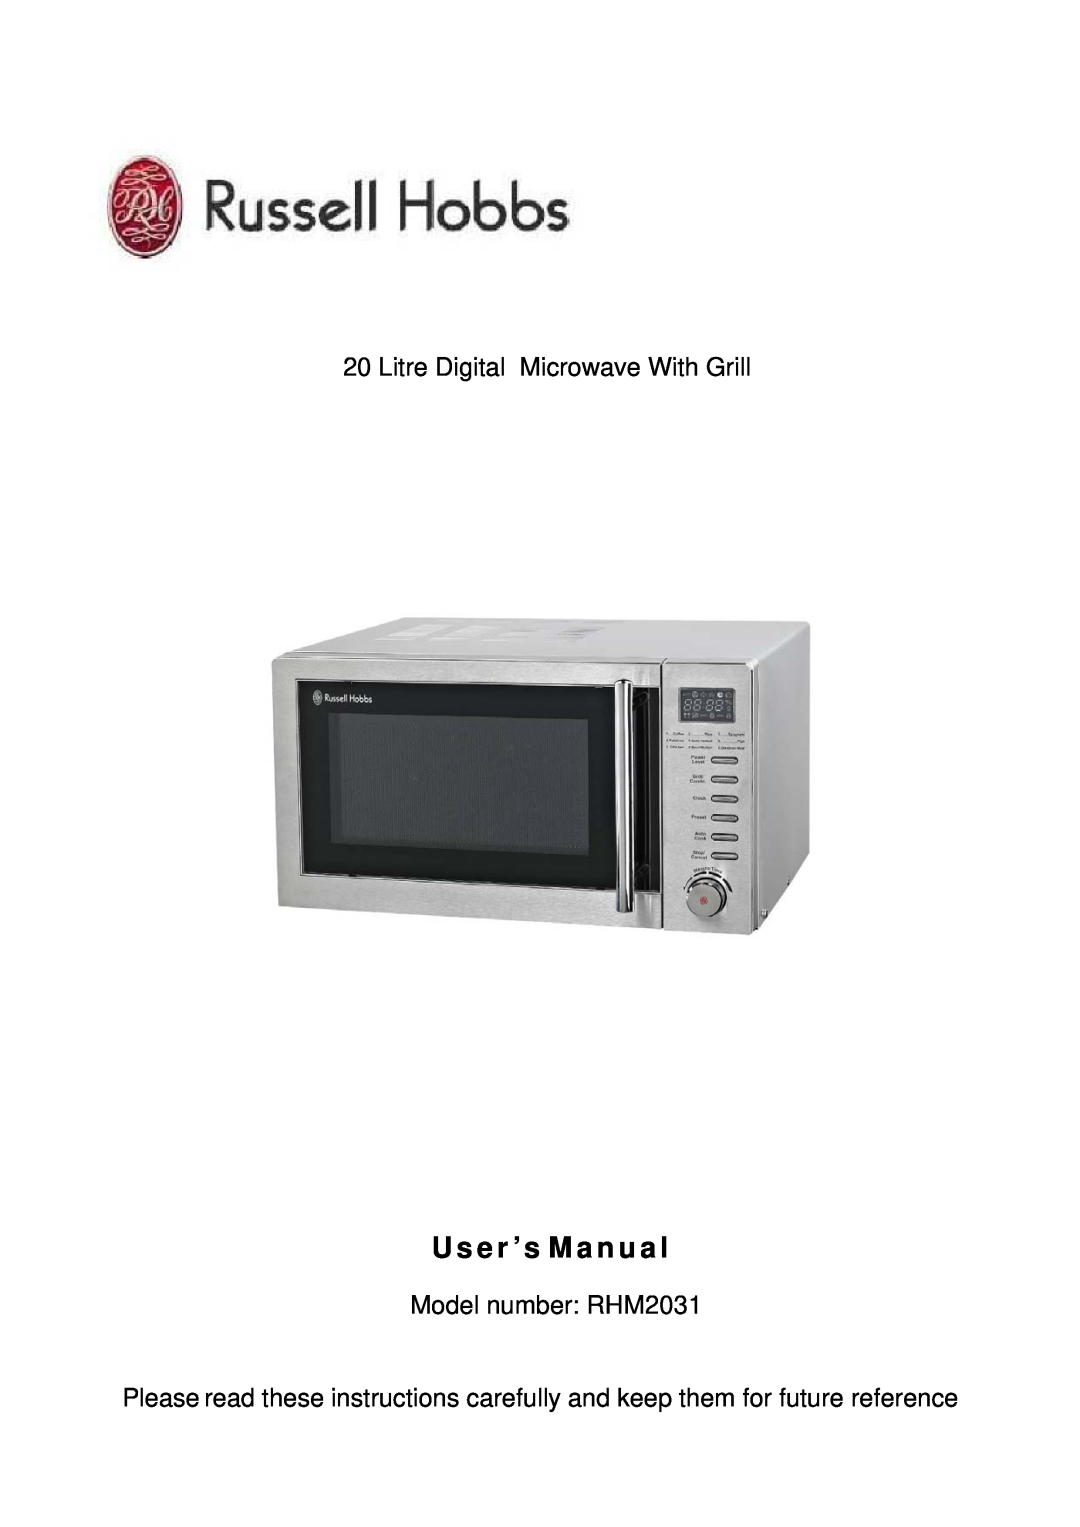 Russell Hobbs user manual Use r ’s Manual, Litre Digital Microwave With Grill, Model number: RHM2031 